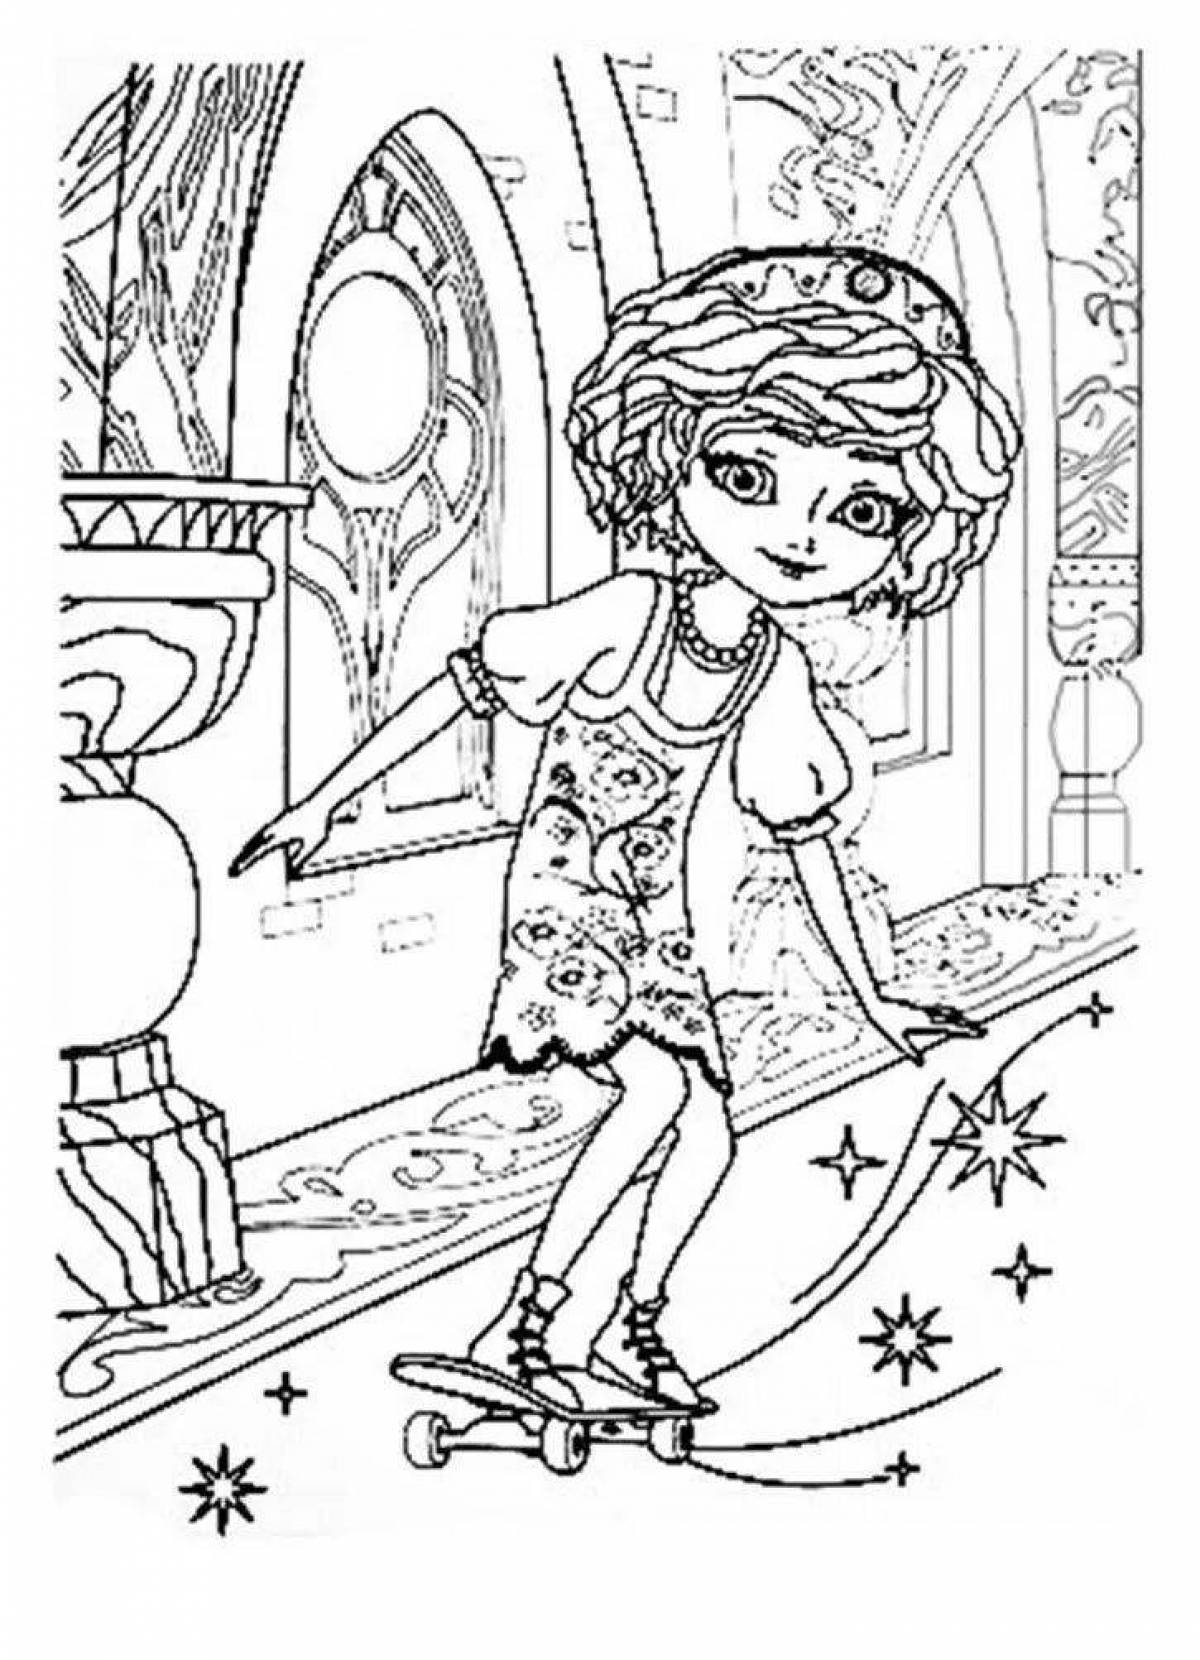 Princess Sony's dazzling coloring book